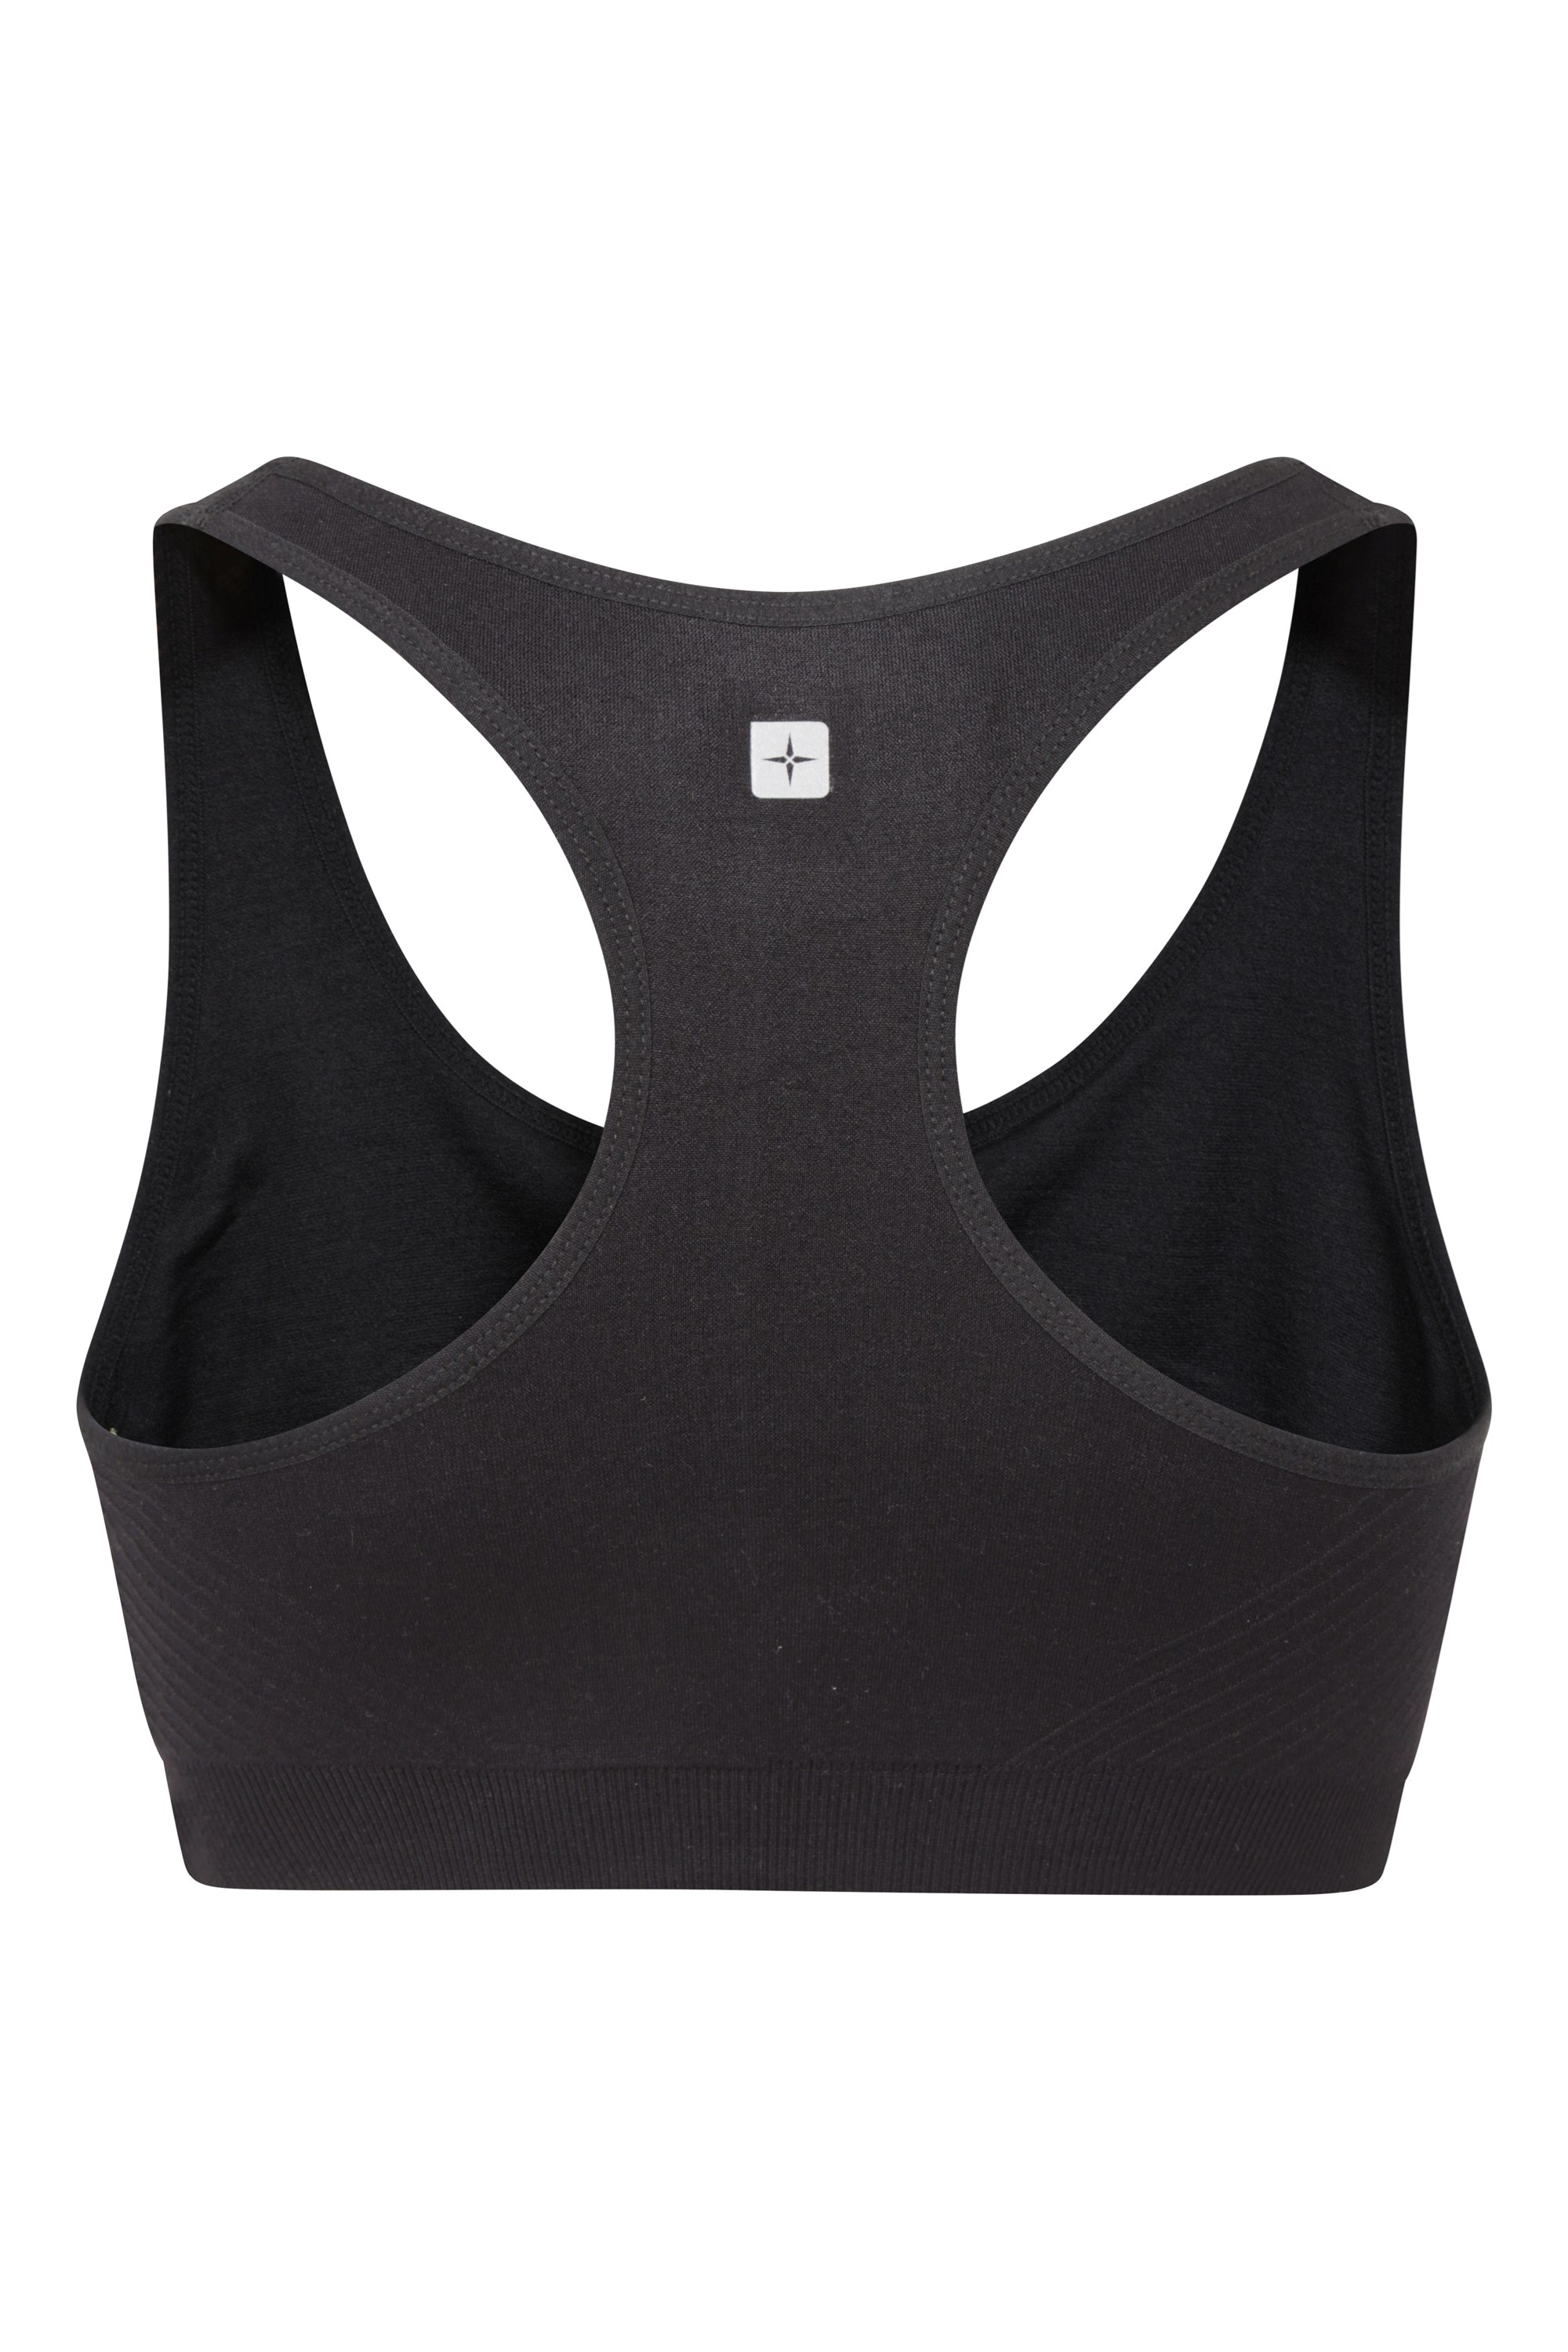 BCG Women's SMLS Zip Front Low Support Plus Size Sports Bra